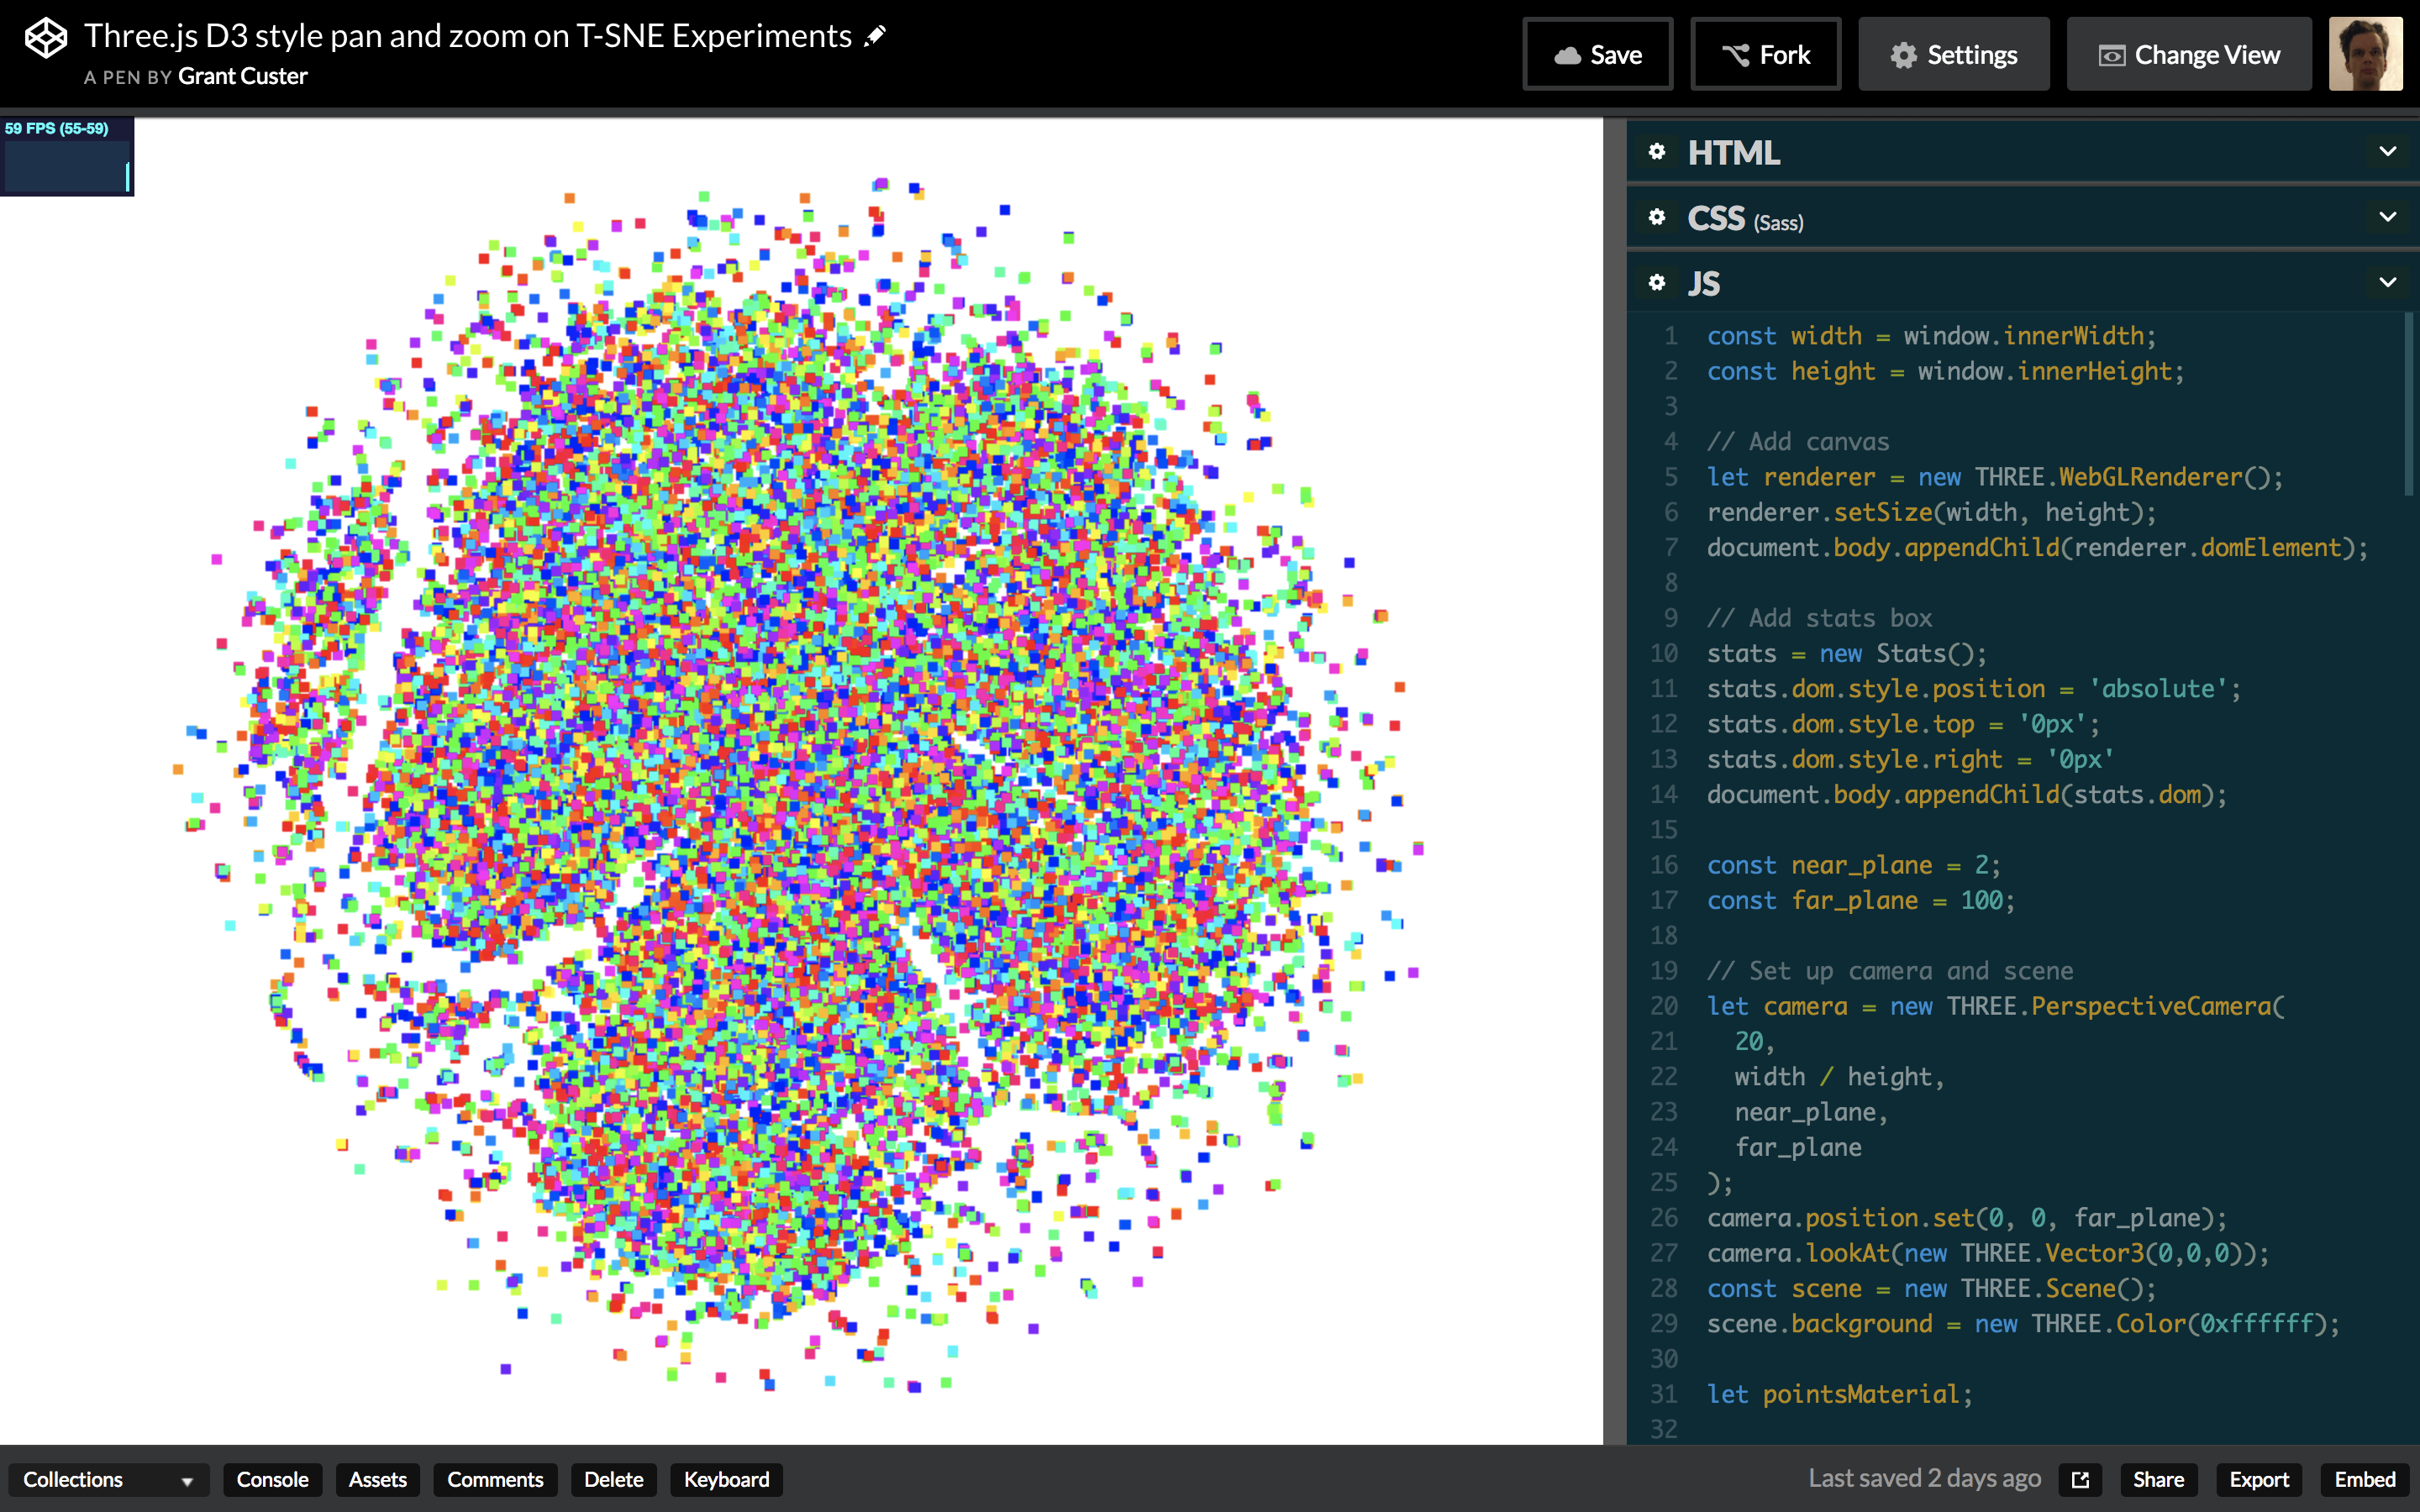 A screenshot of the final working demo: a plotted t-sne with working pan and zoom.